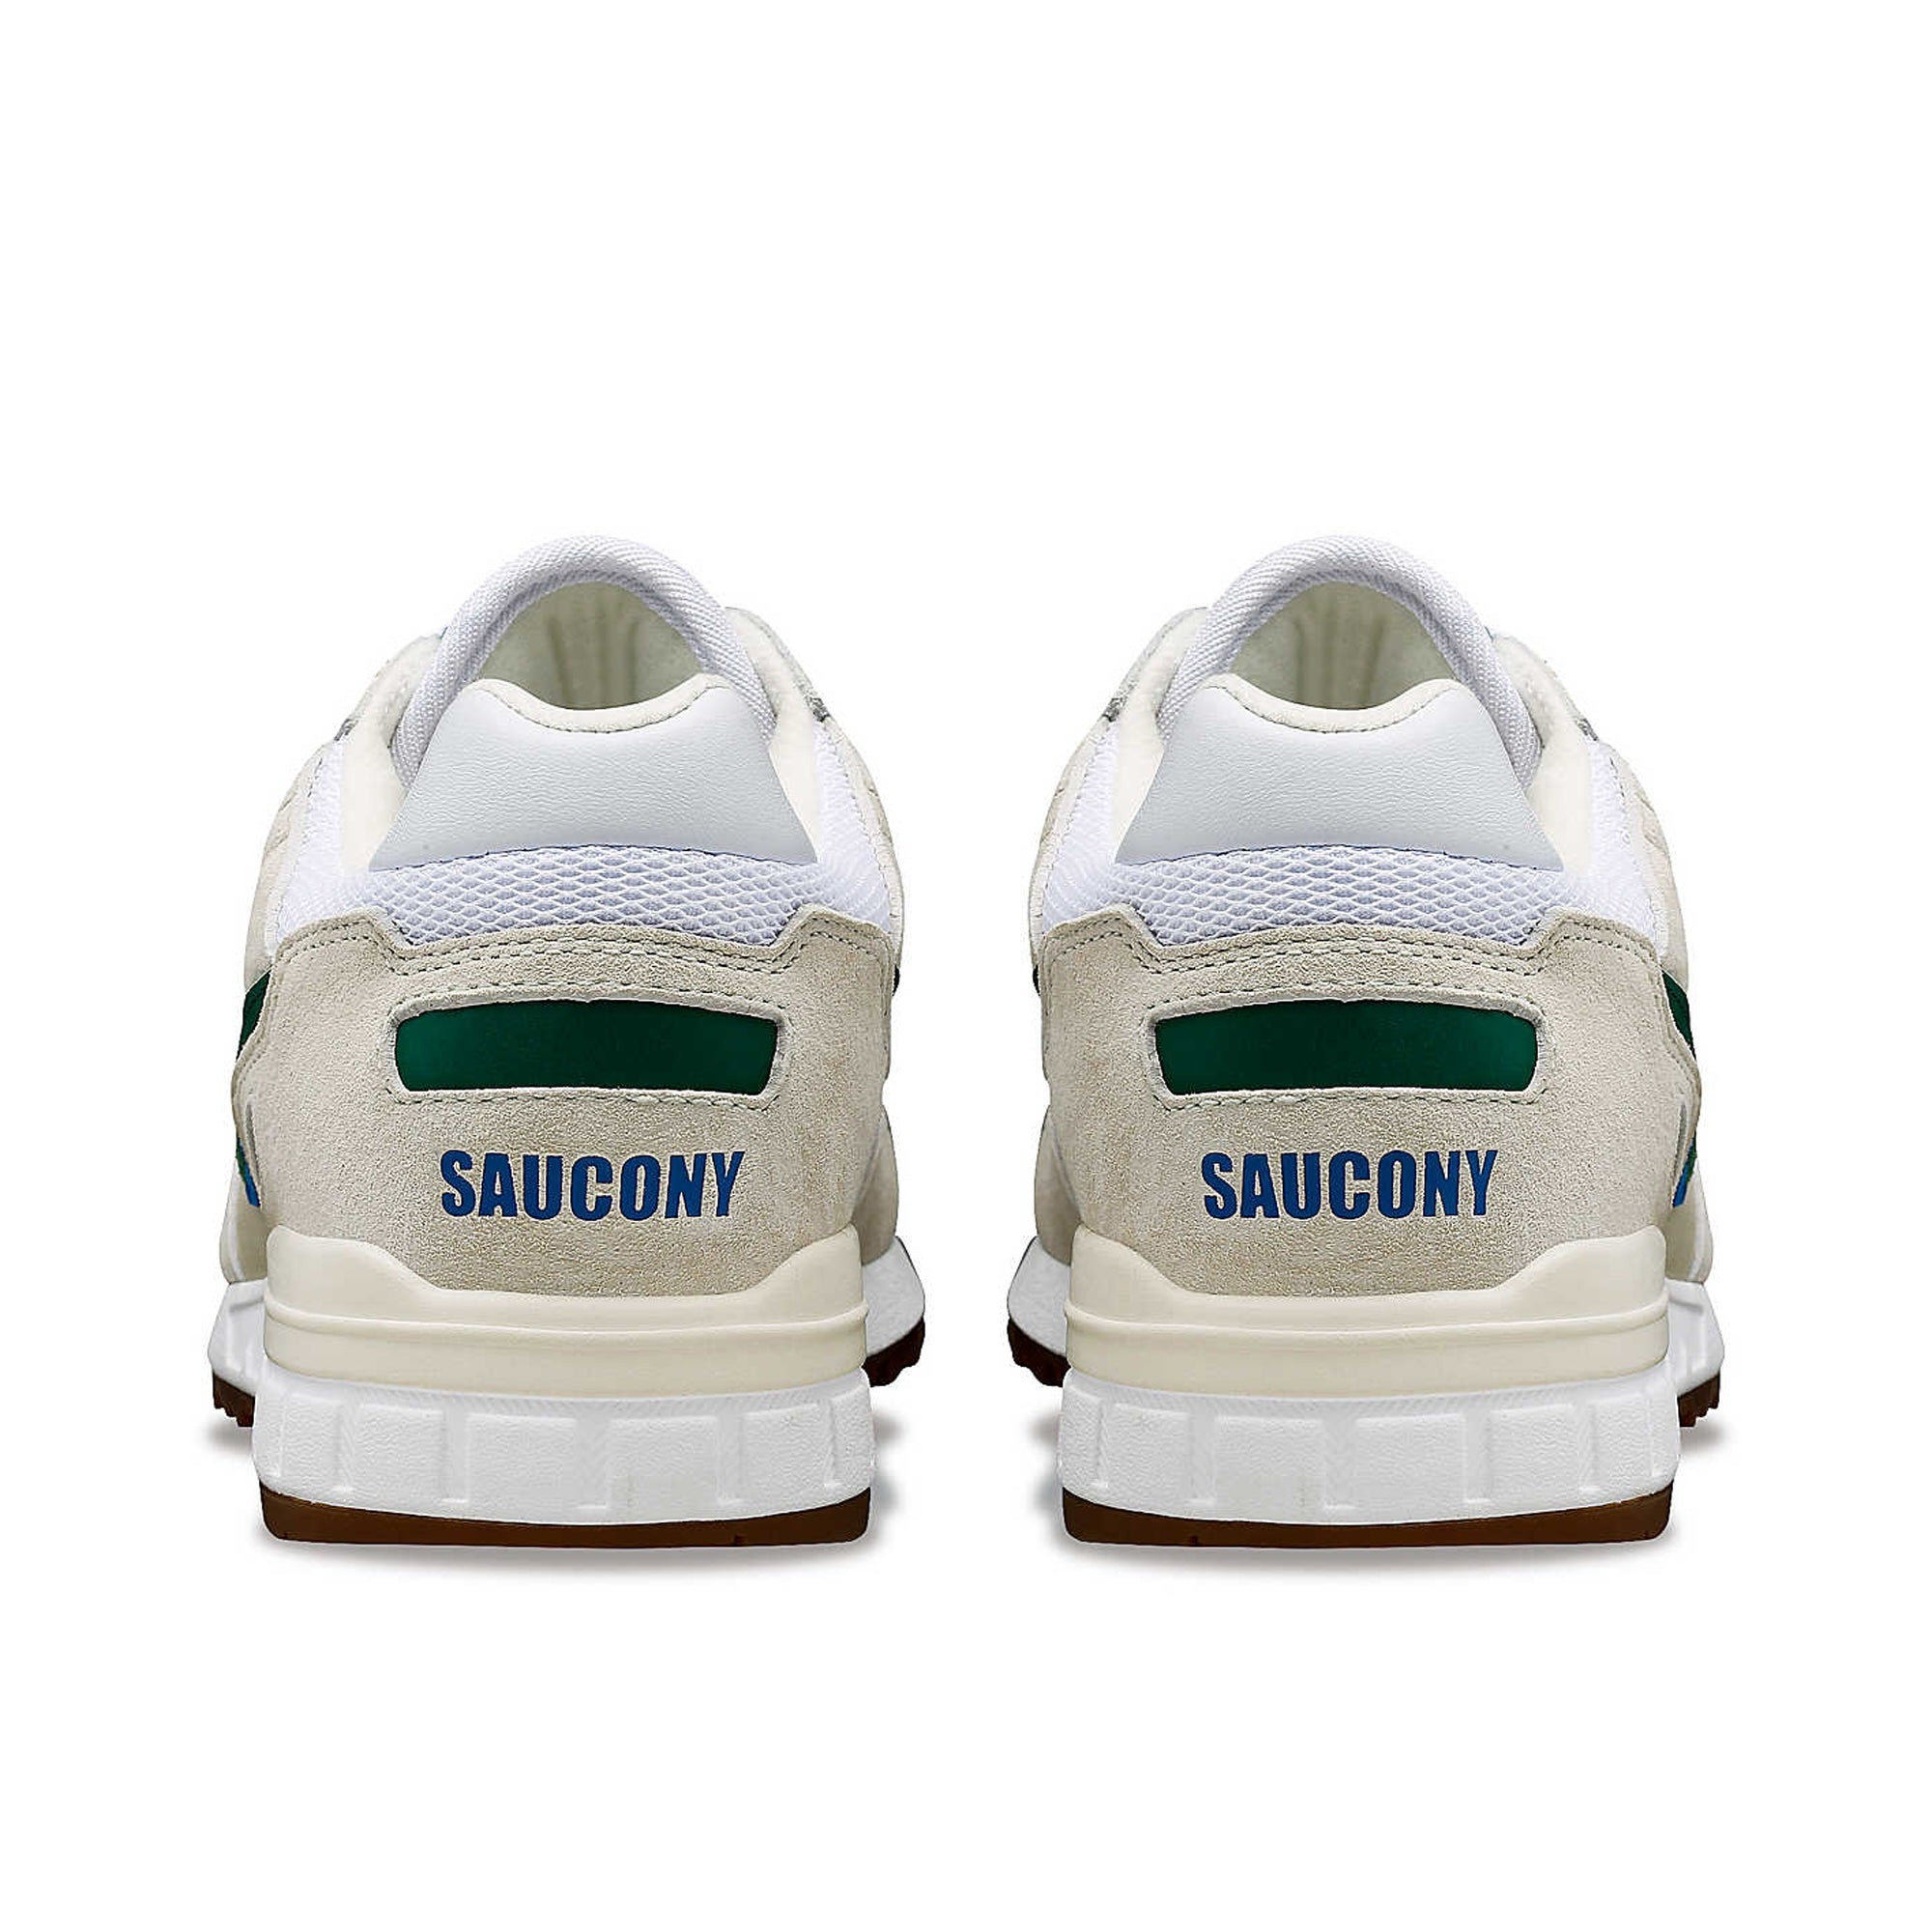 Saucony Shadow 5000 Premium "Ivy Prep Pack" Trainers - White/Green